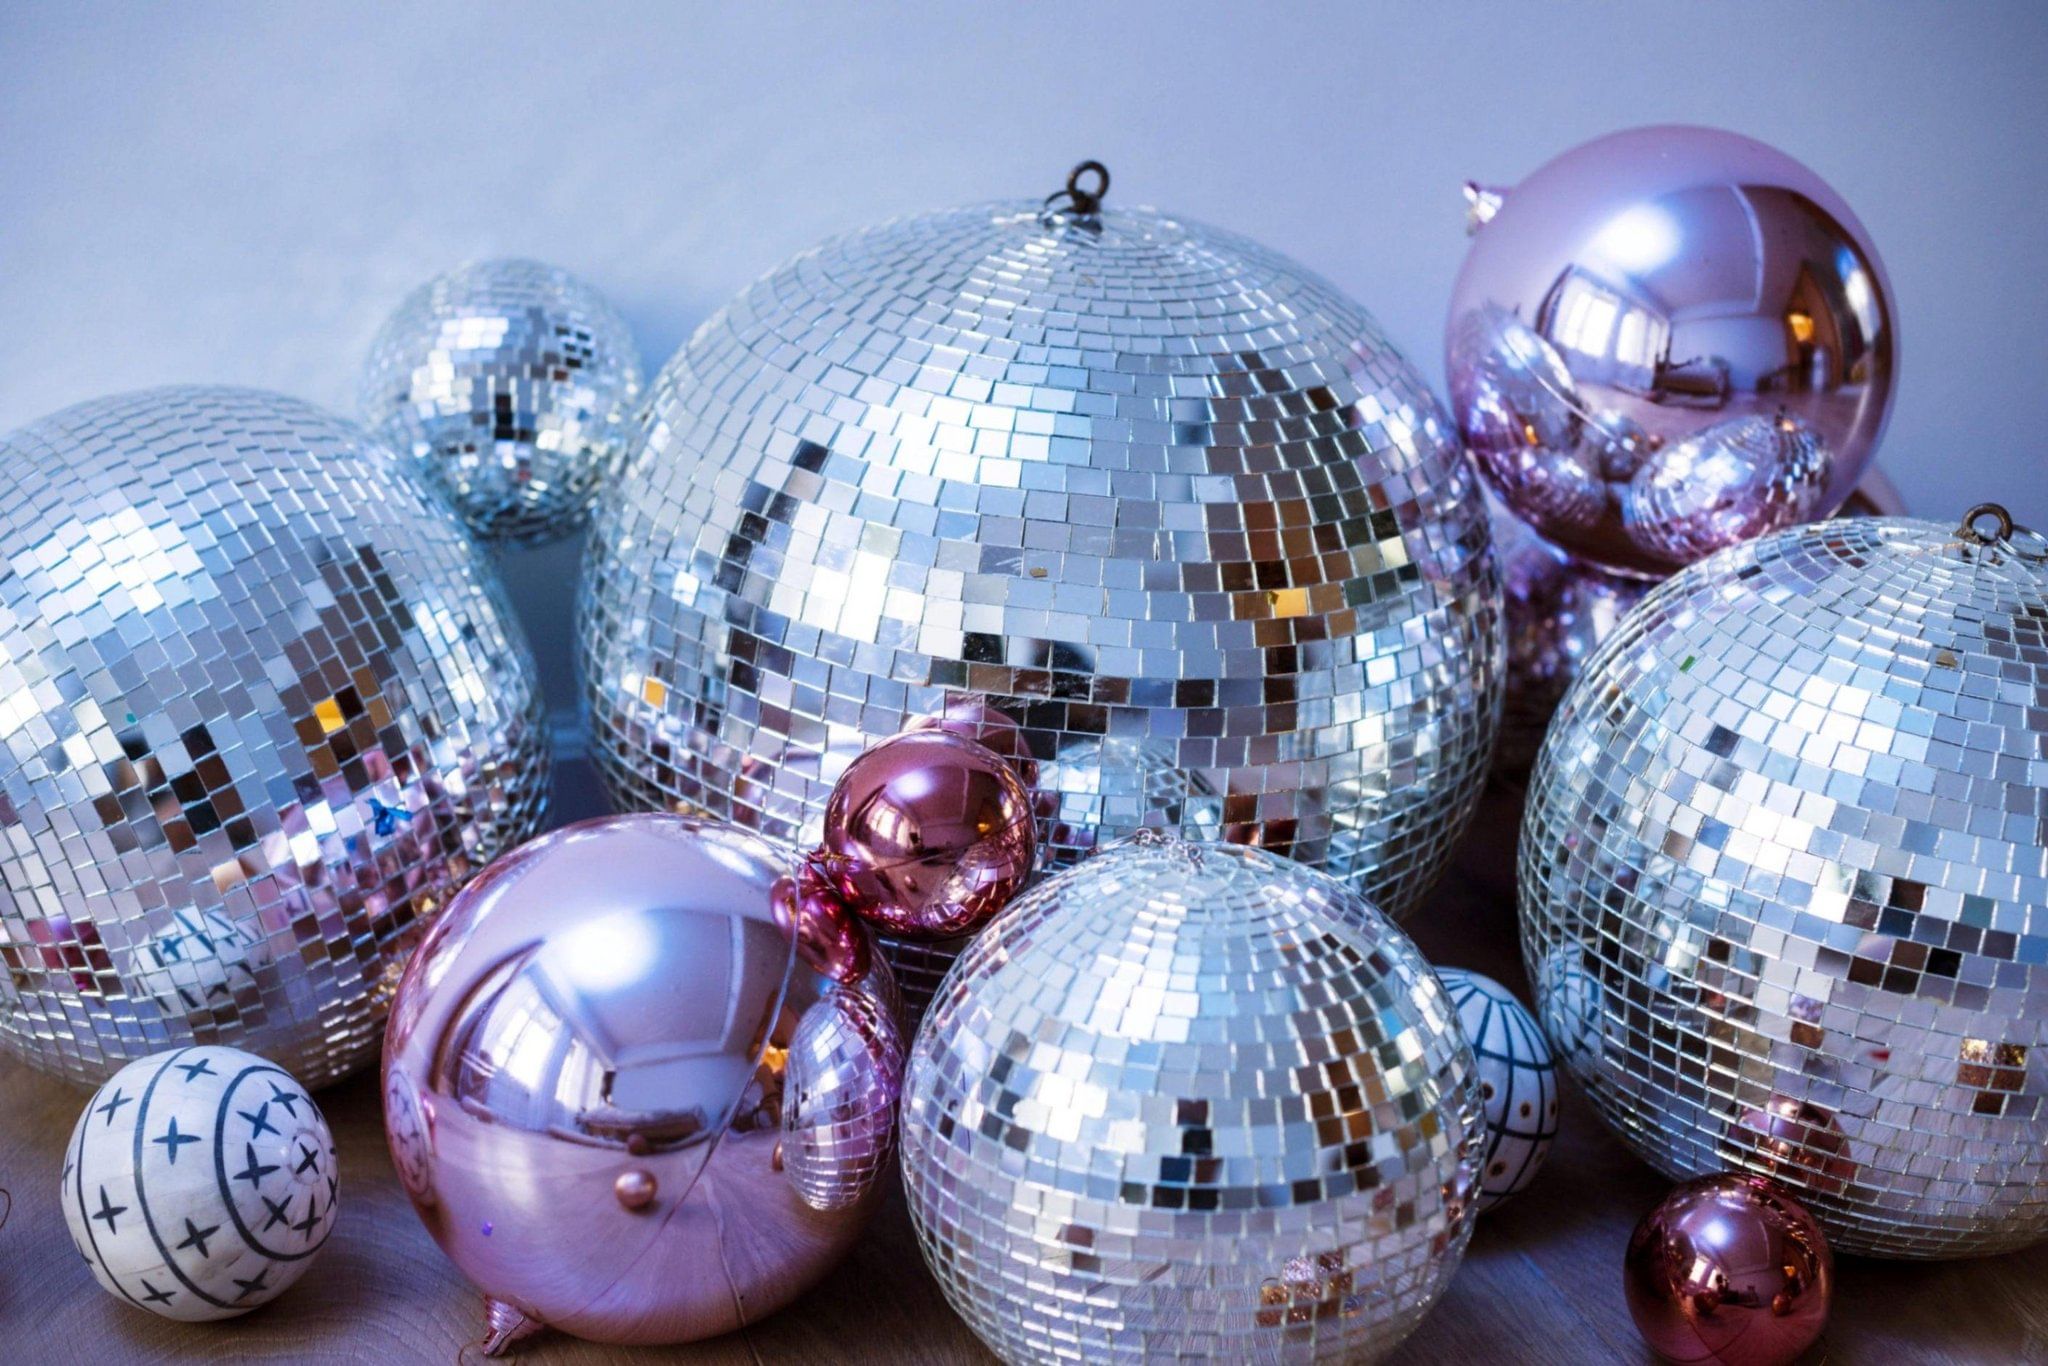 Party balls. Шары зеркальные для декора праздника. Disco Ball background. Disco Ball Party Pink decorations. Balls Party.